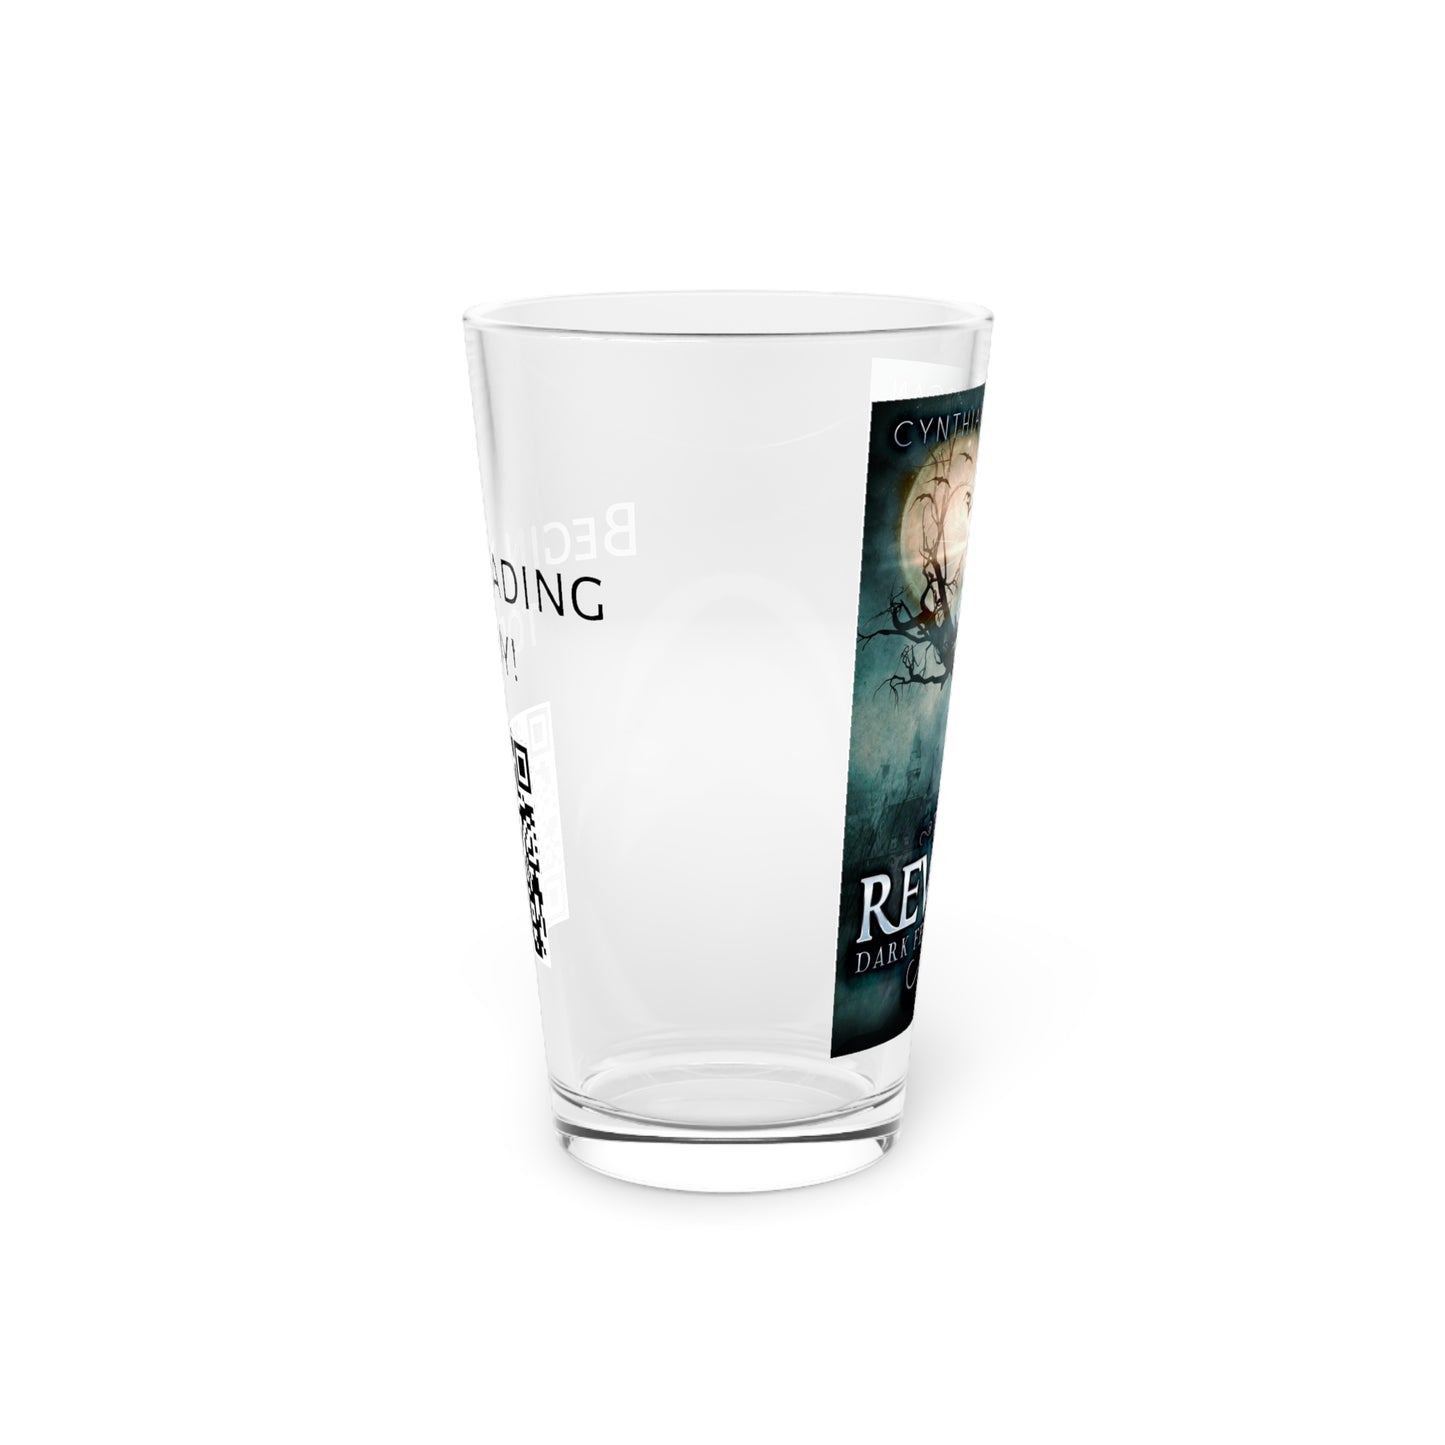 The Reviled - Pint Glass